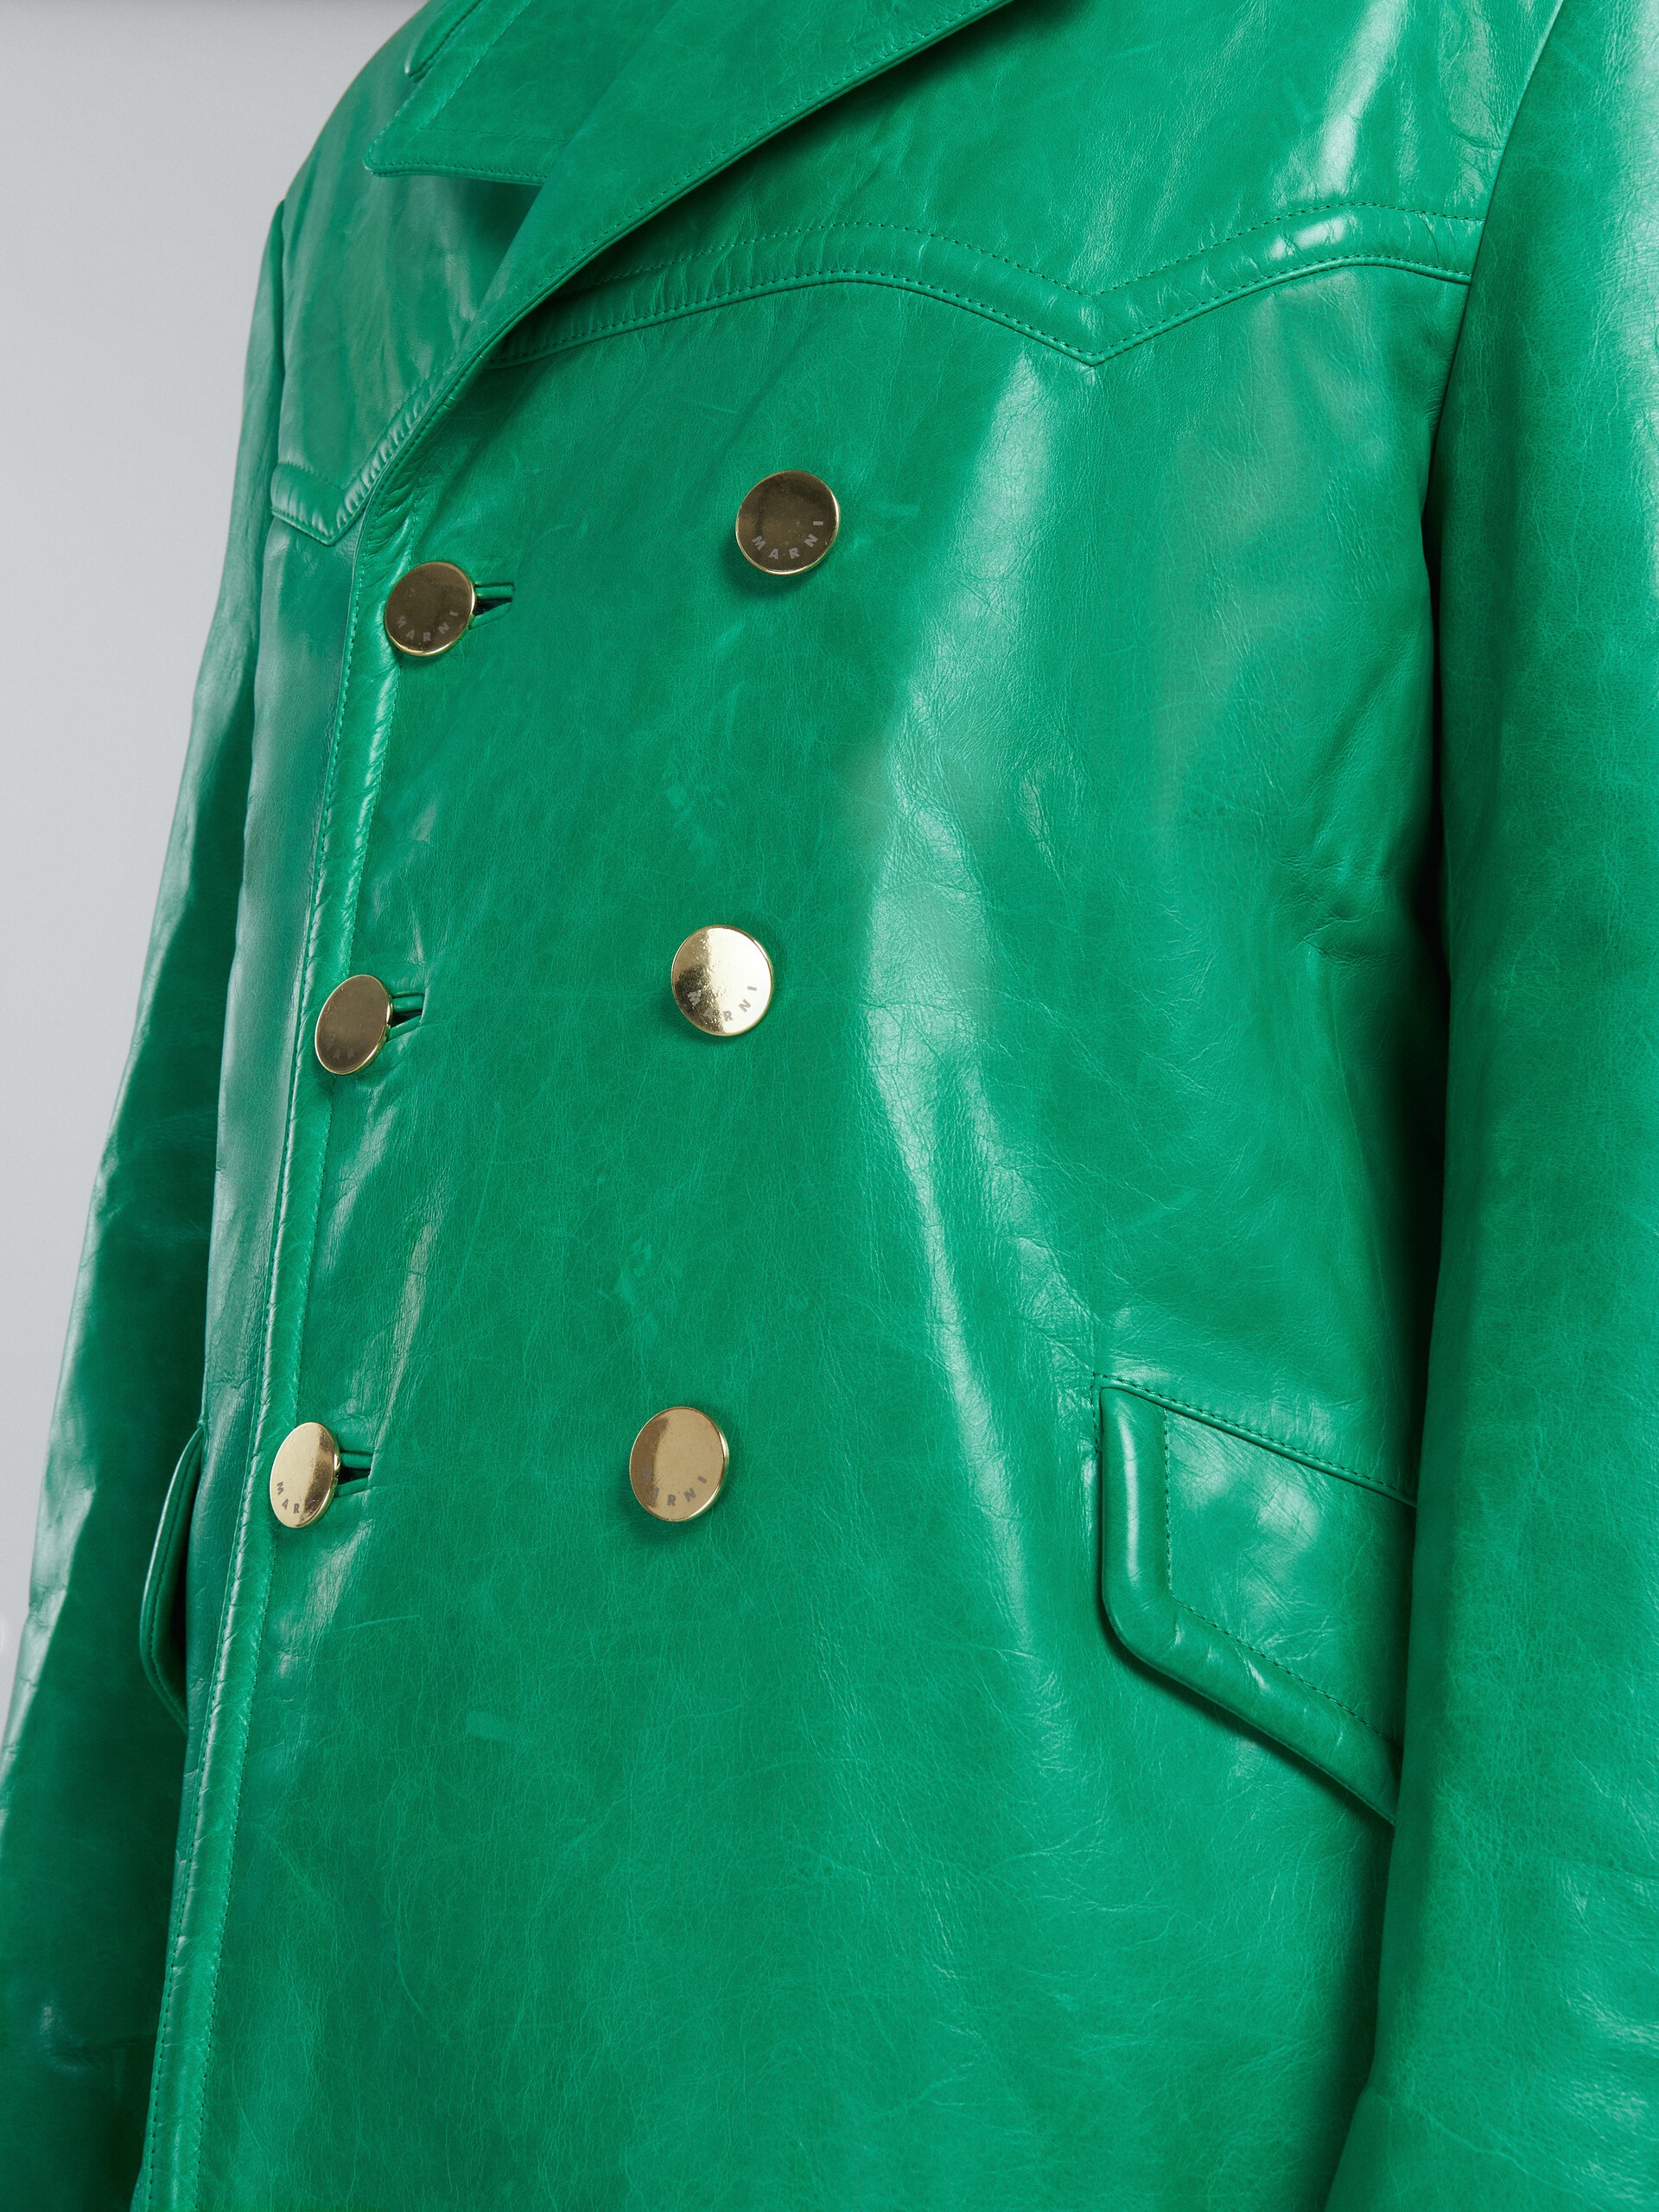 DOUBLE-BREASTED JACKET IN SHINY GREEN LEATHER - 5